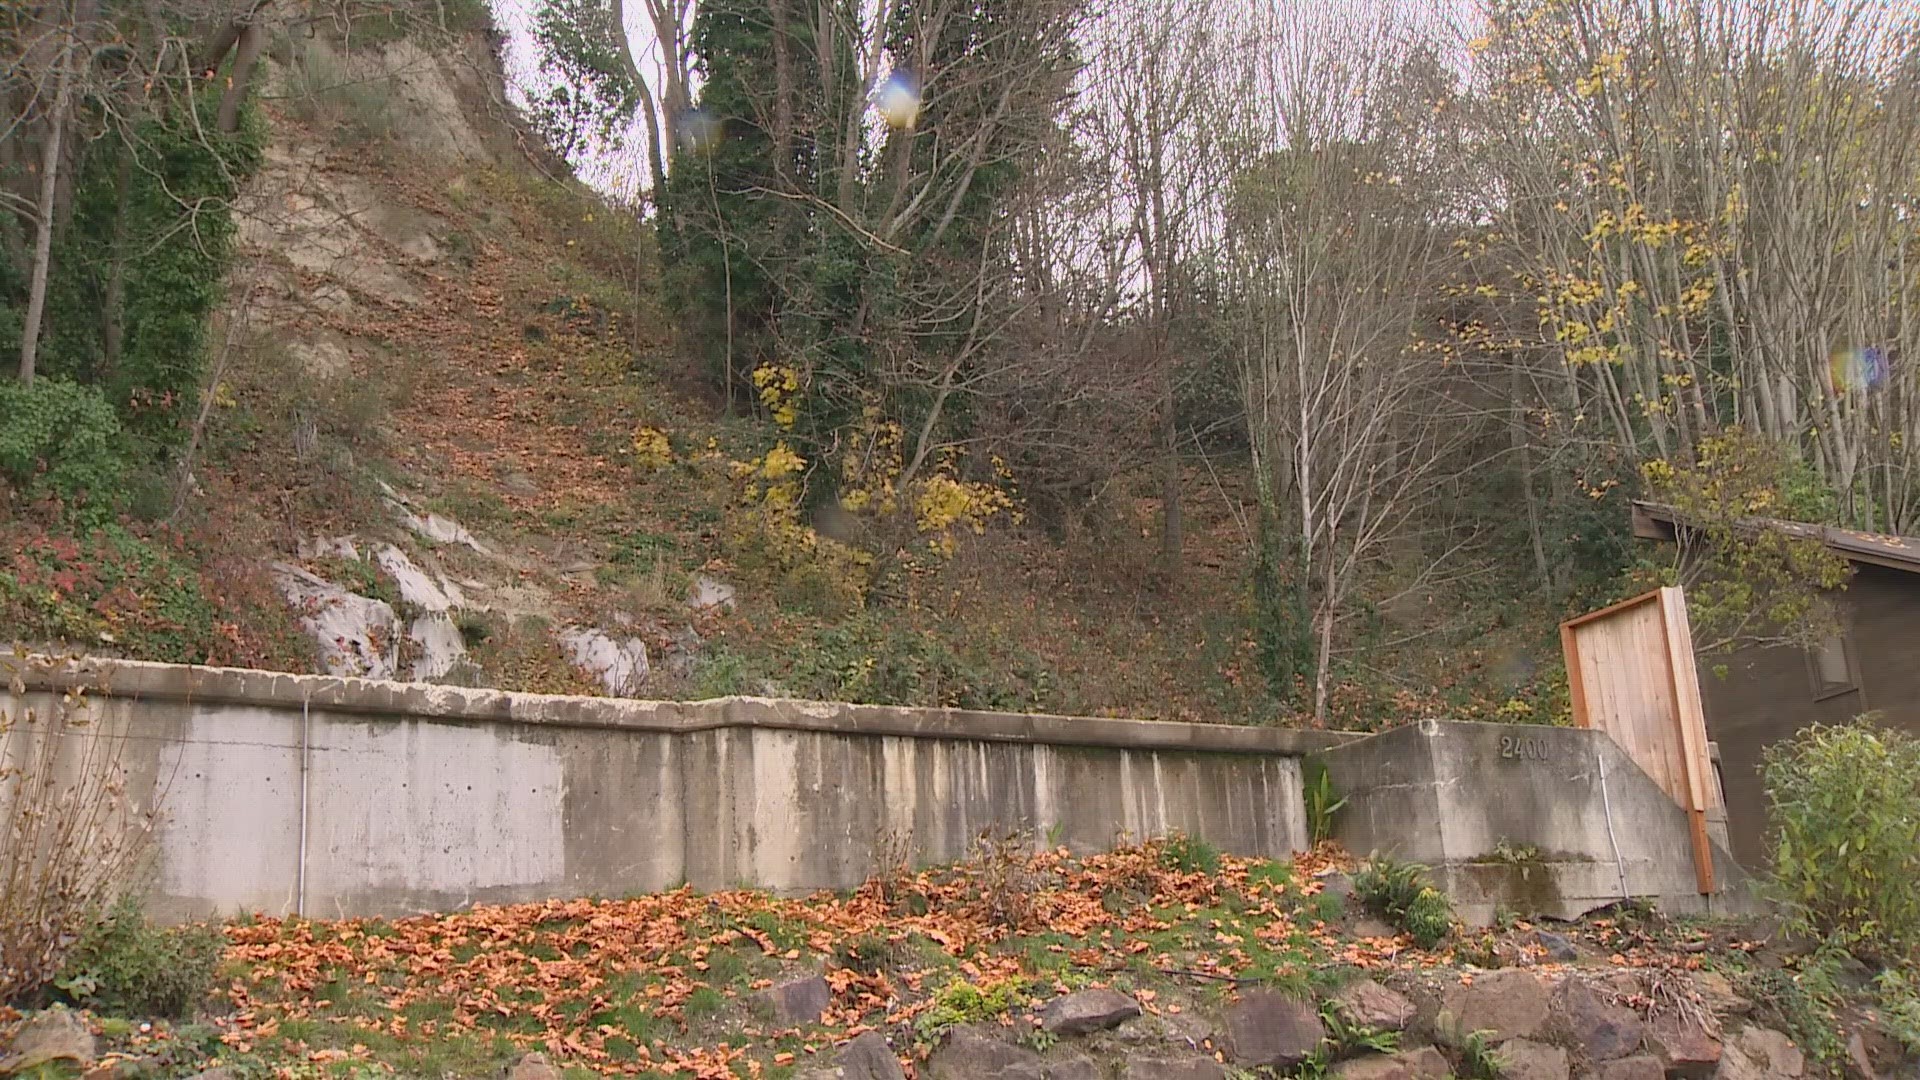 There are 20,000 properties considered to be prone to landslides in Seattle. The city is encouraging people to be aware of the risks.